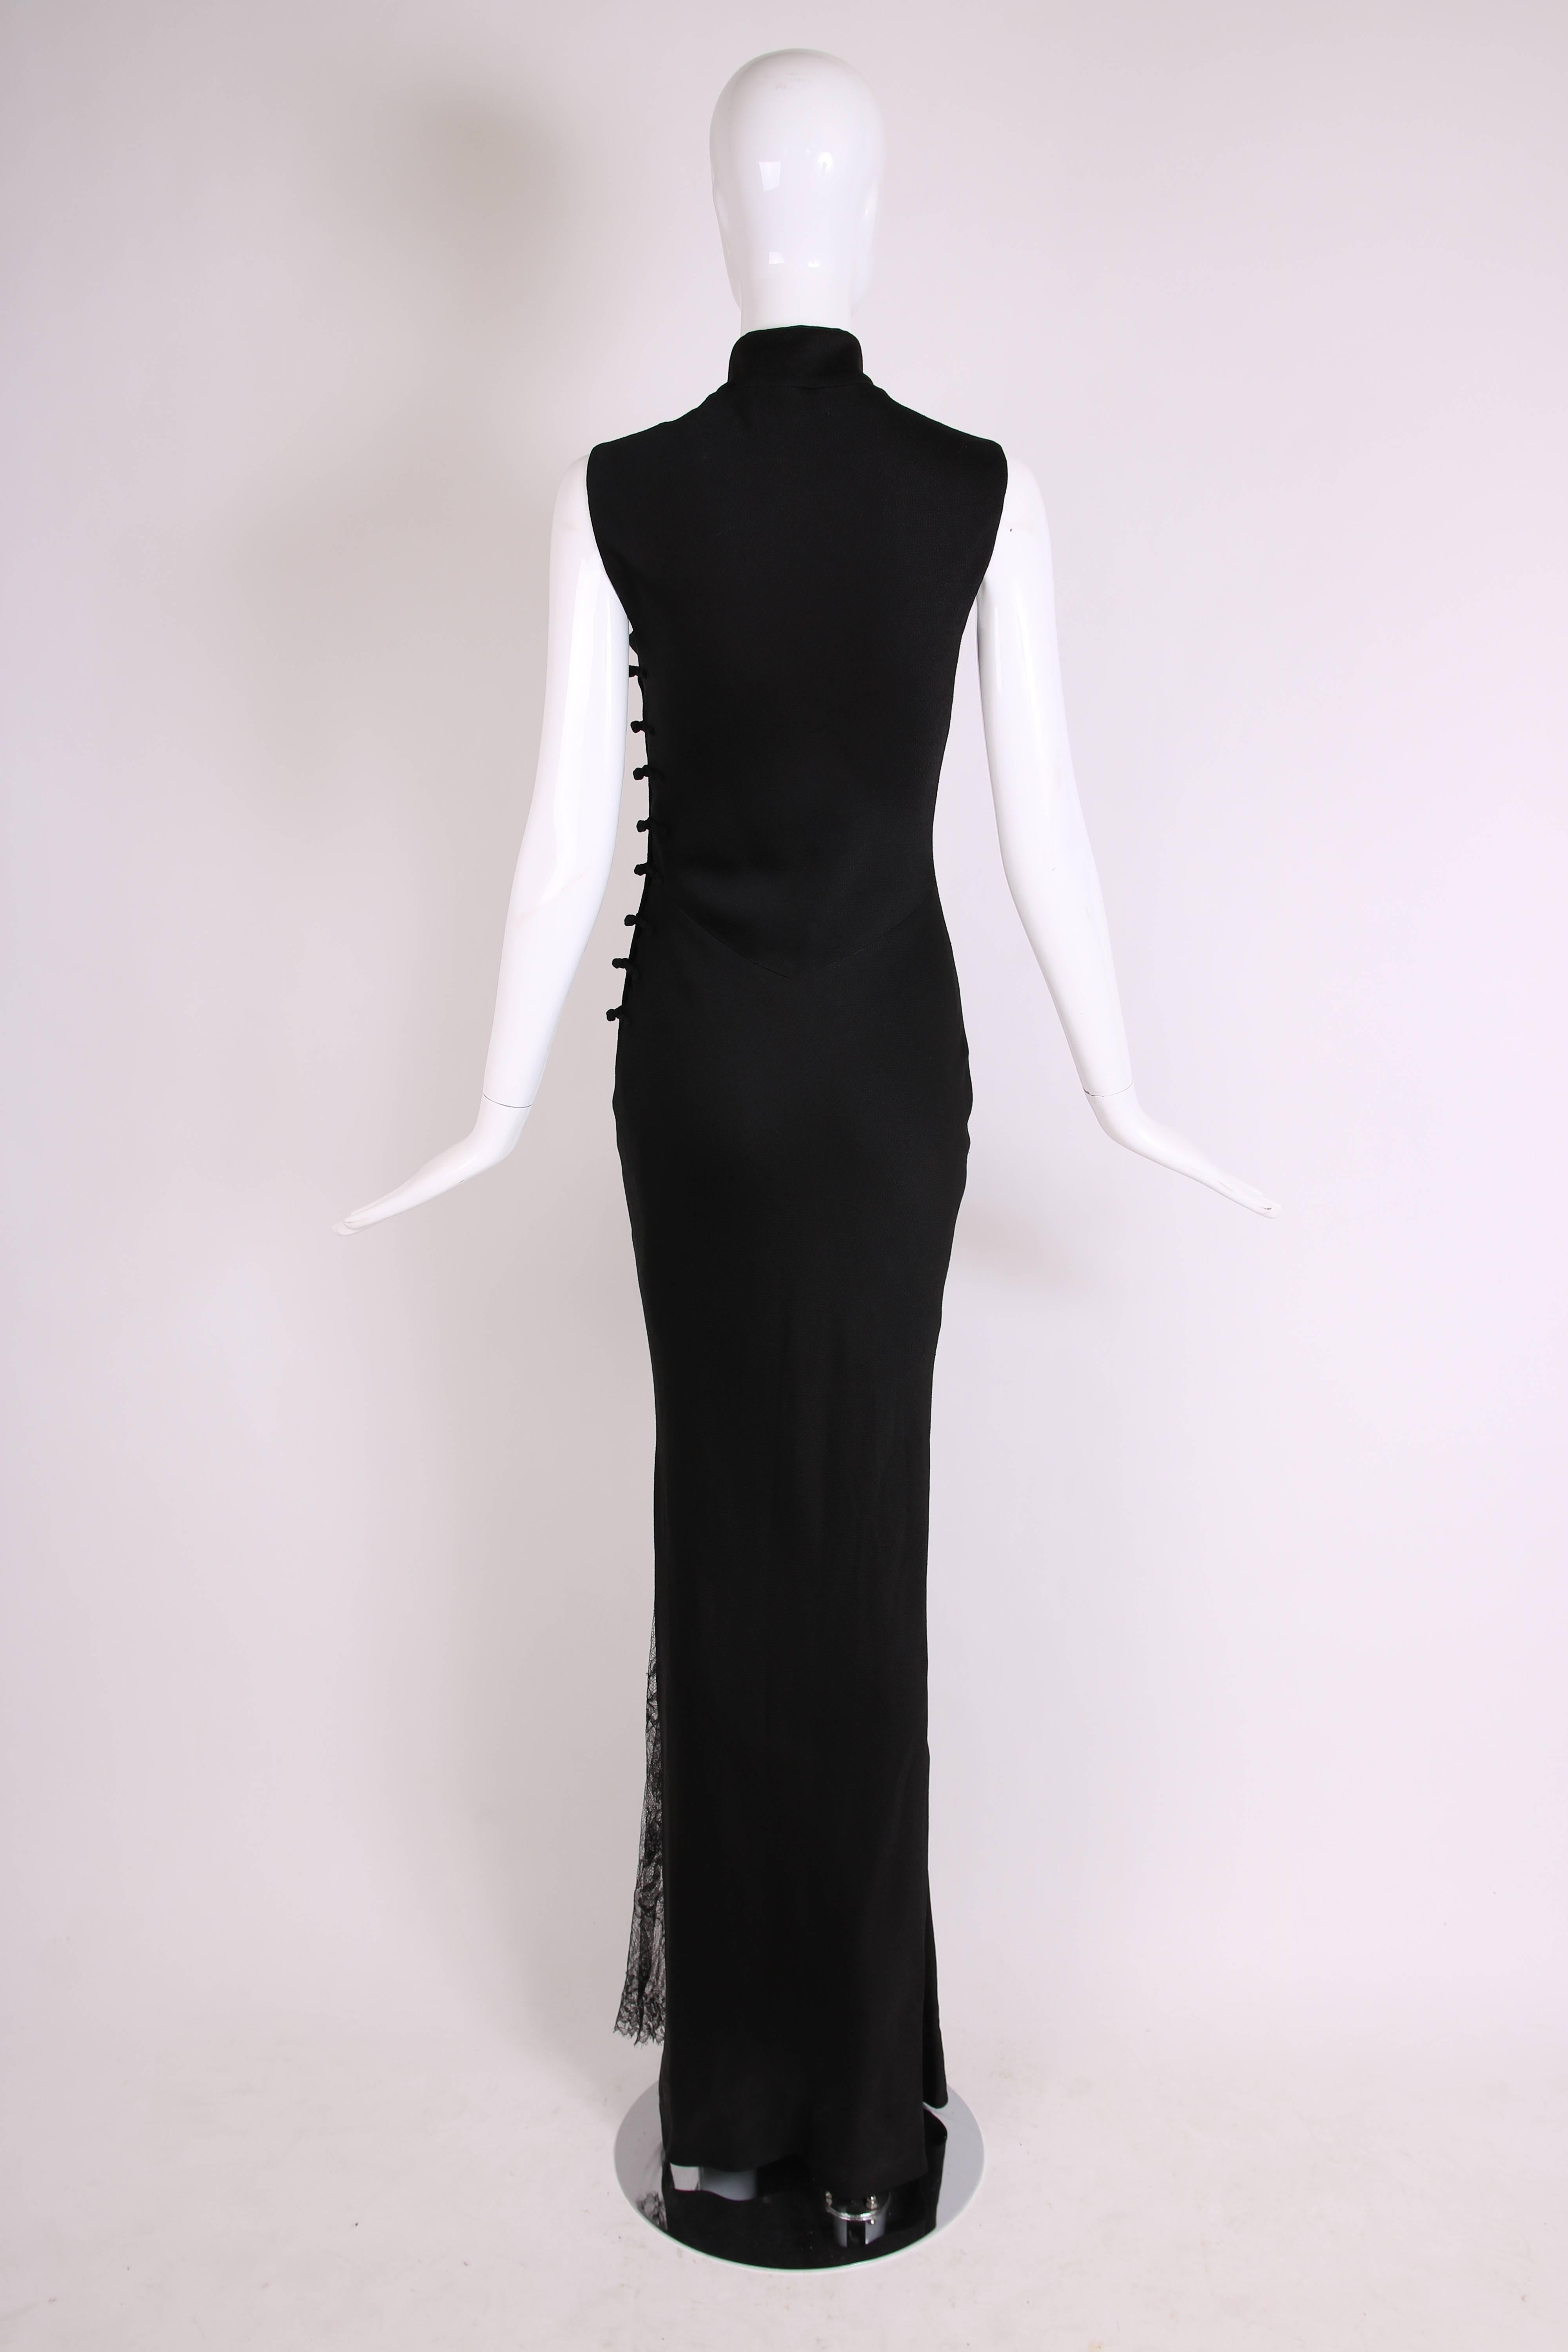 Christian Dior by Galliano Black Sleeveless Evening Gown w/Lace Inset Side Slit 1